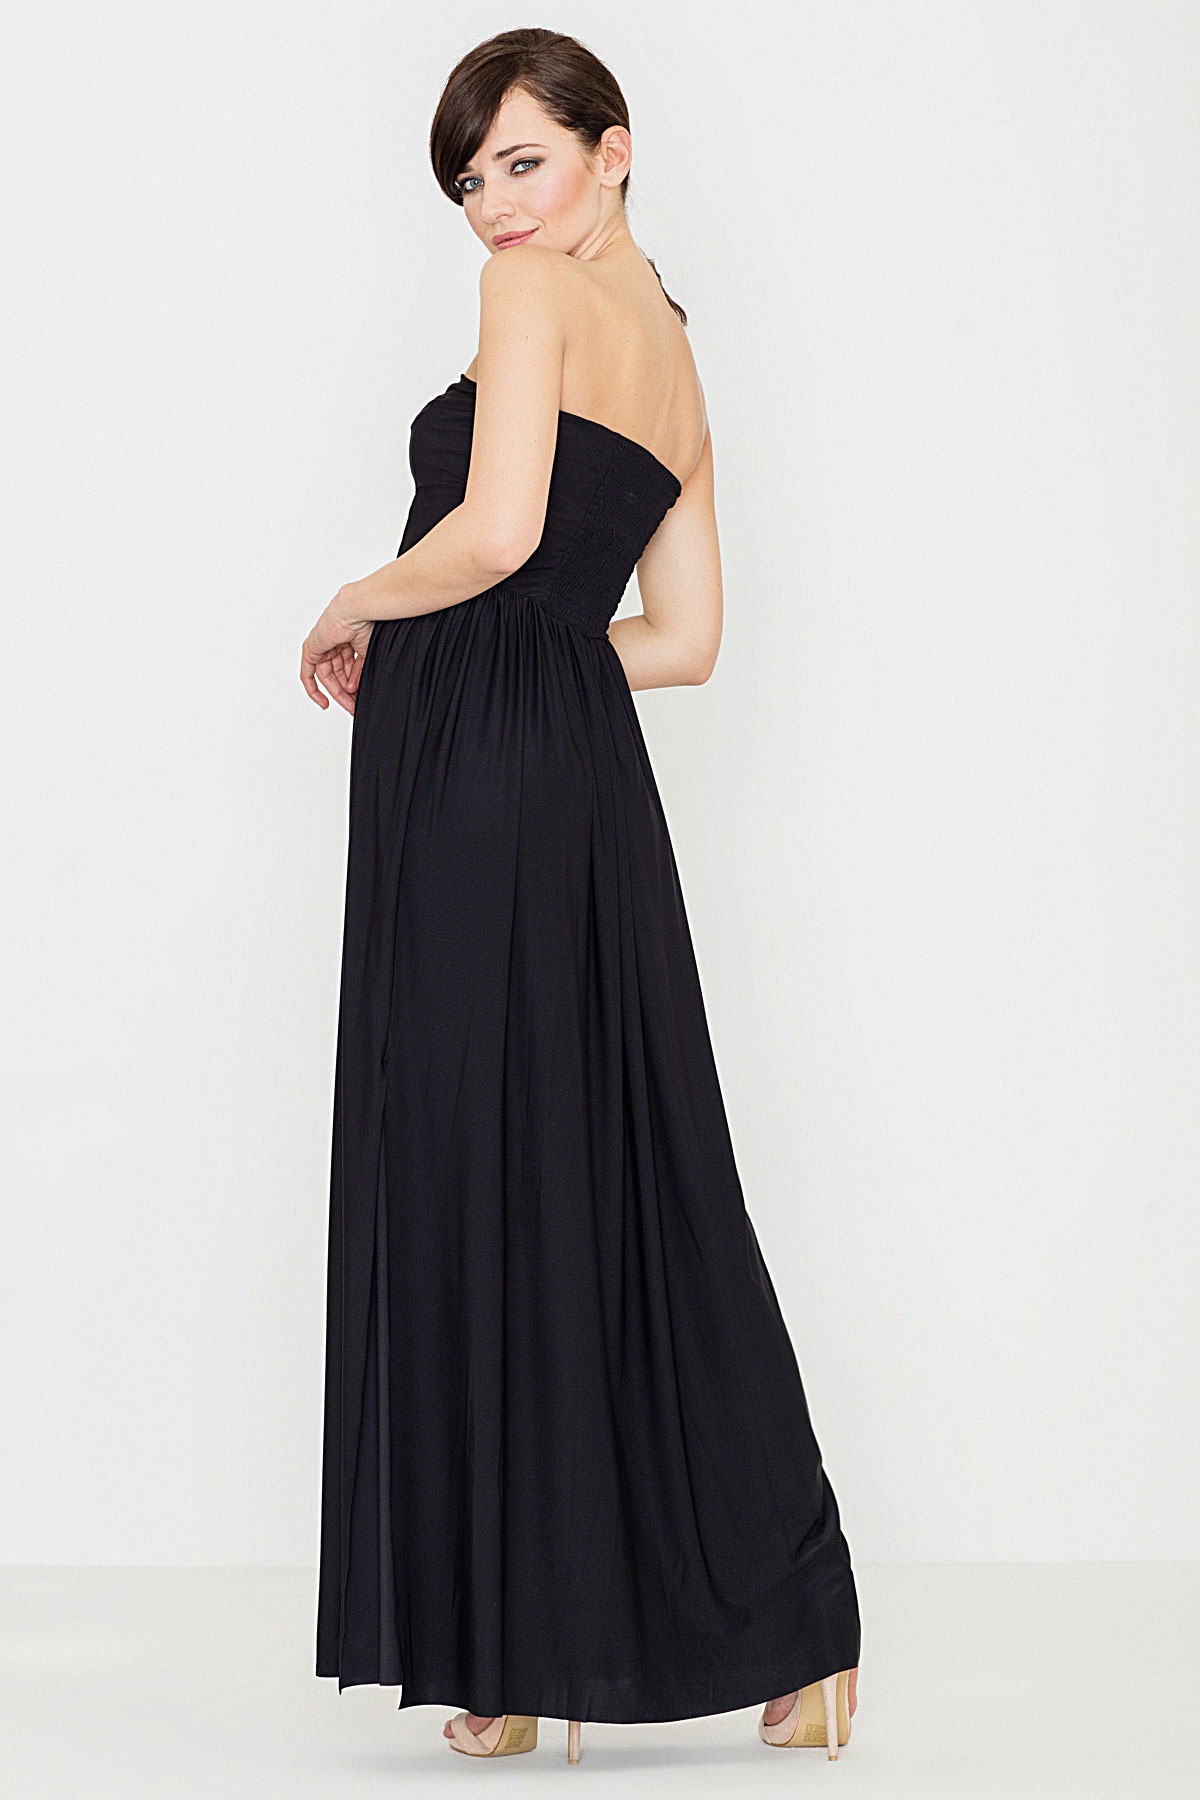 Black strapless dress, with slit on the thigh